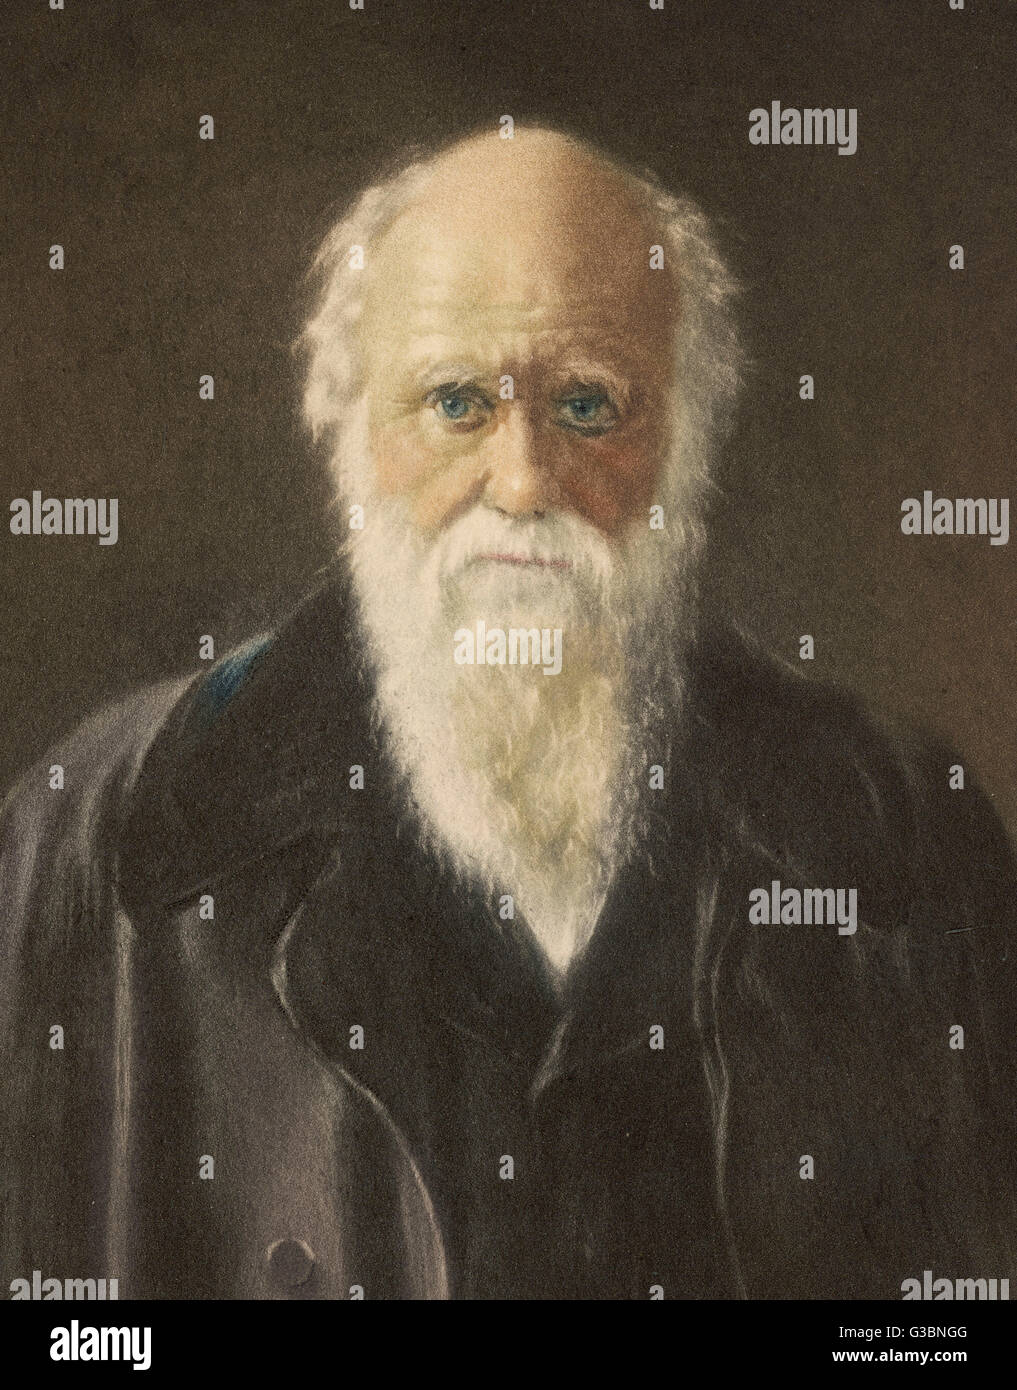 CHARLES DARWIN (1809-1882) towards the end of his life Stock Photo